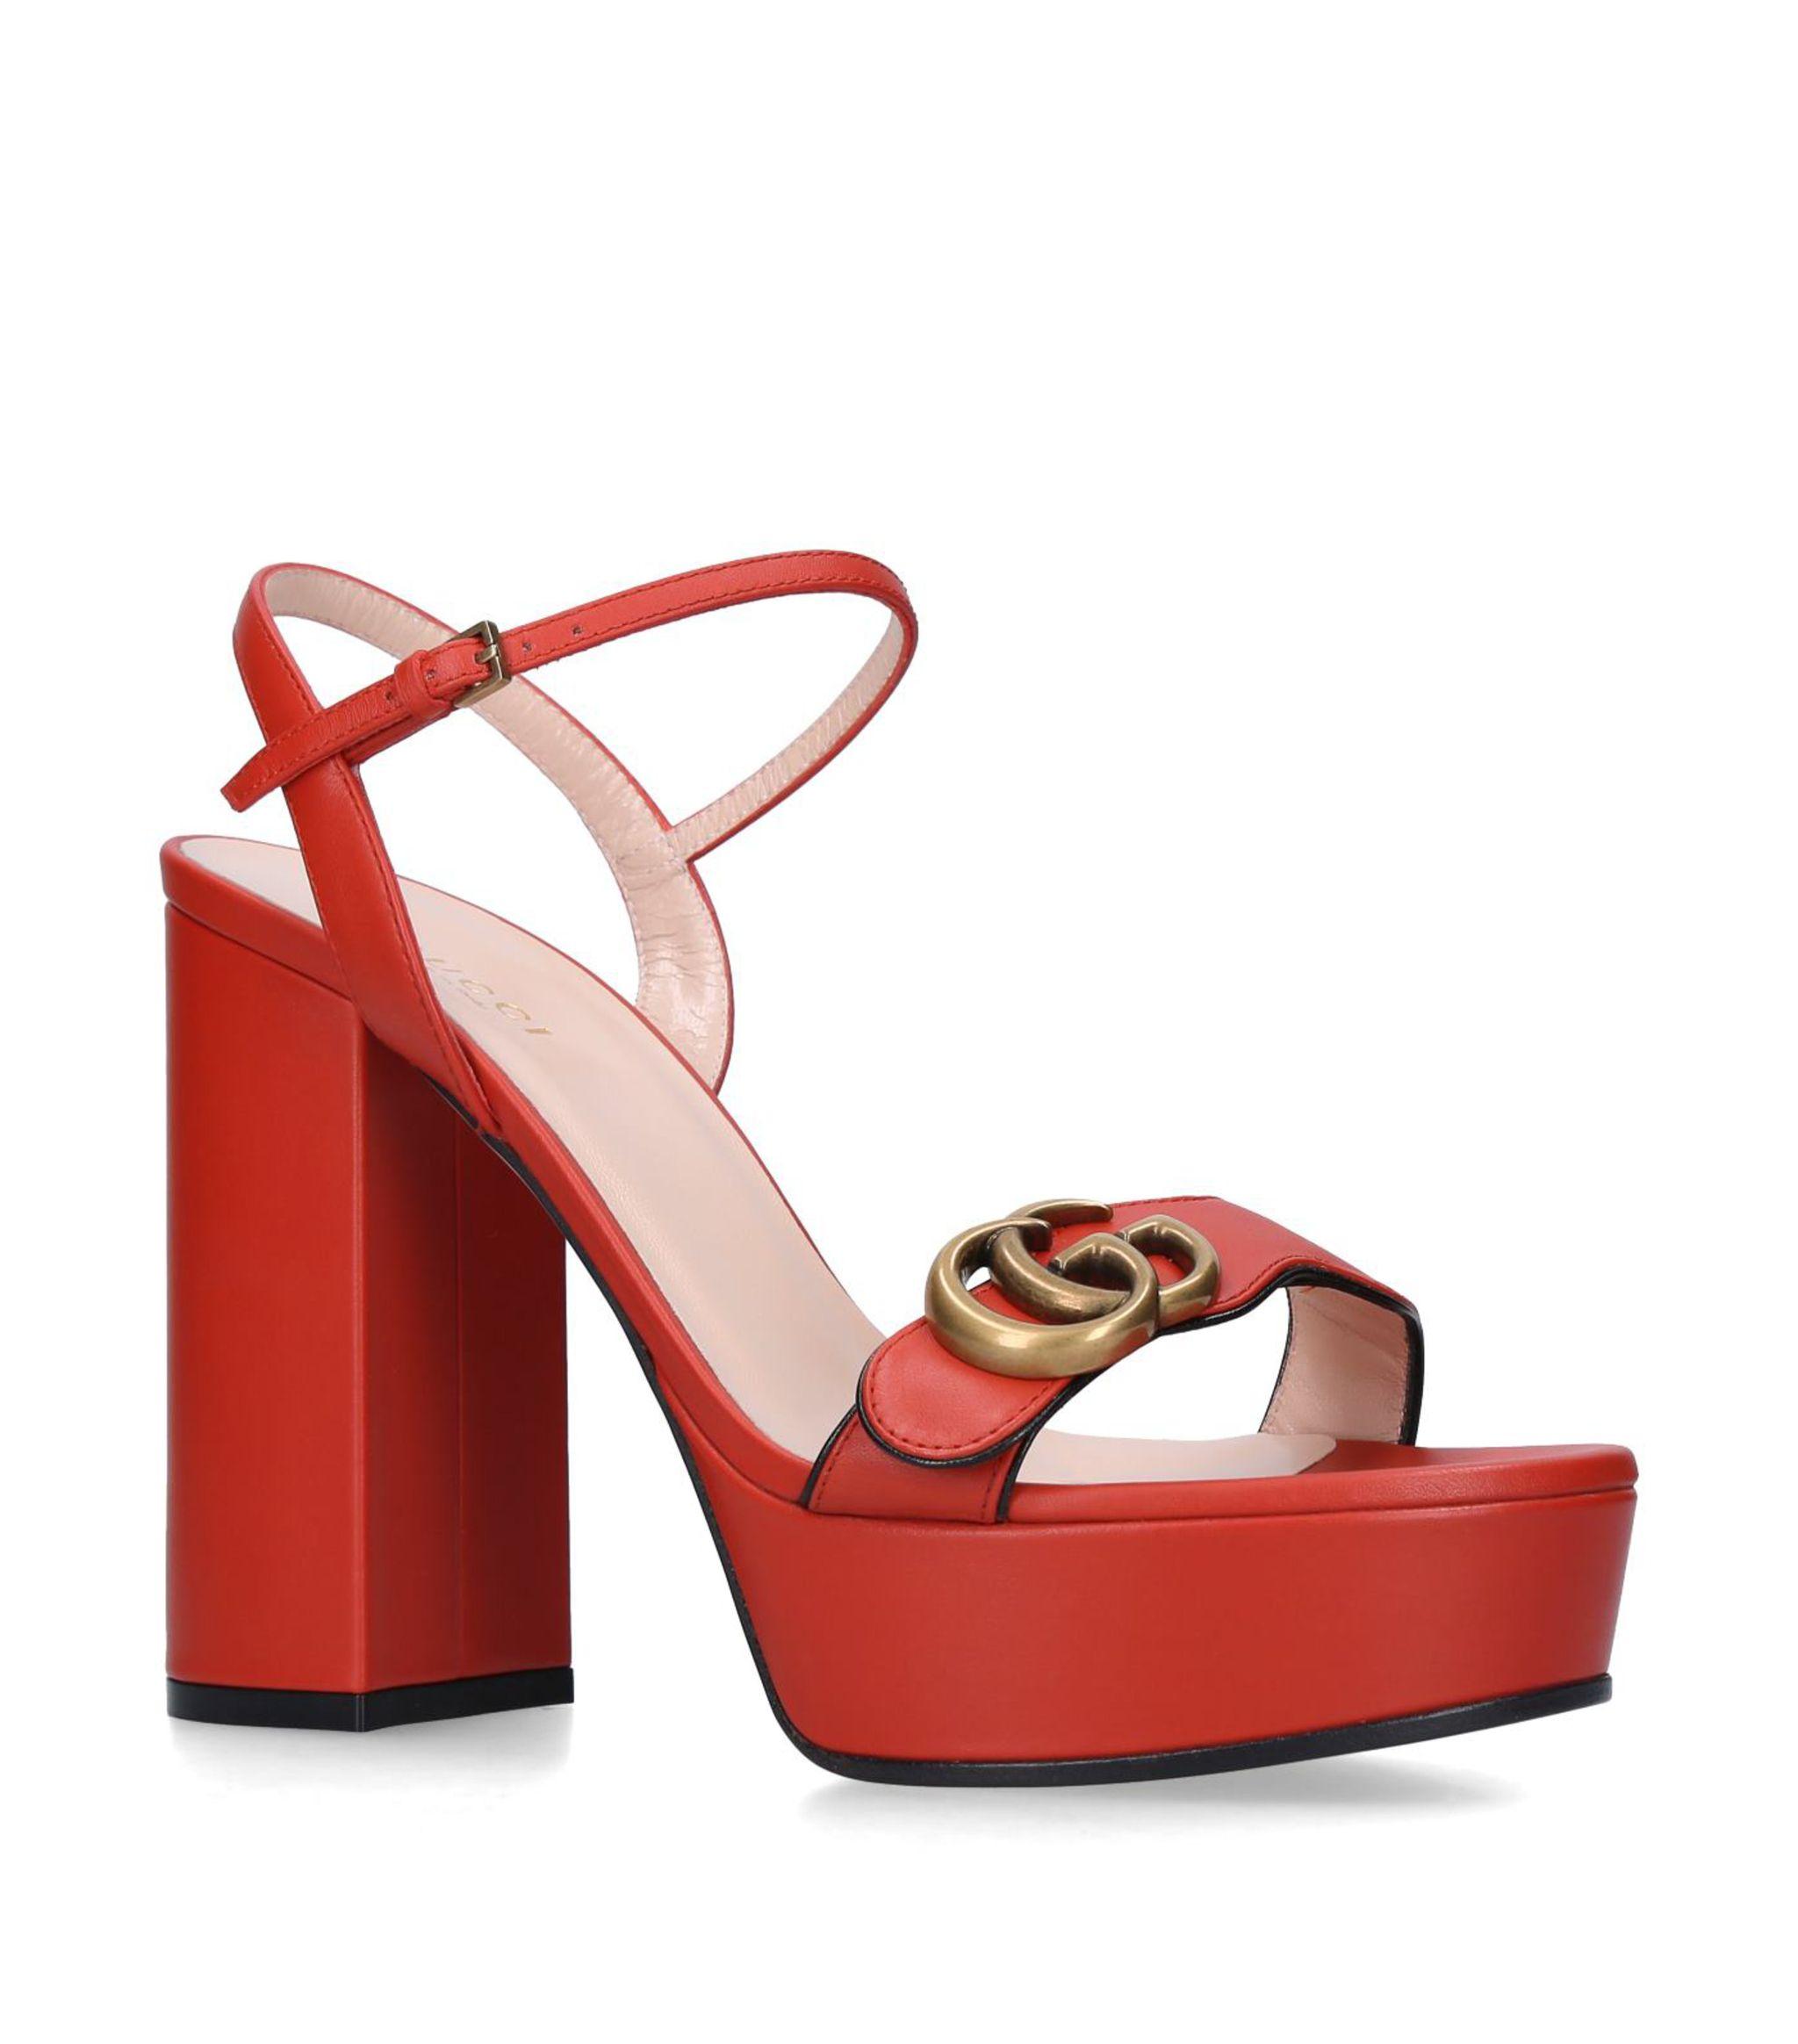 Gucci Leather Marmont Platform Sandals 85 in Red - Lyst